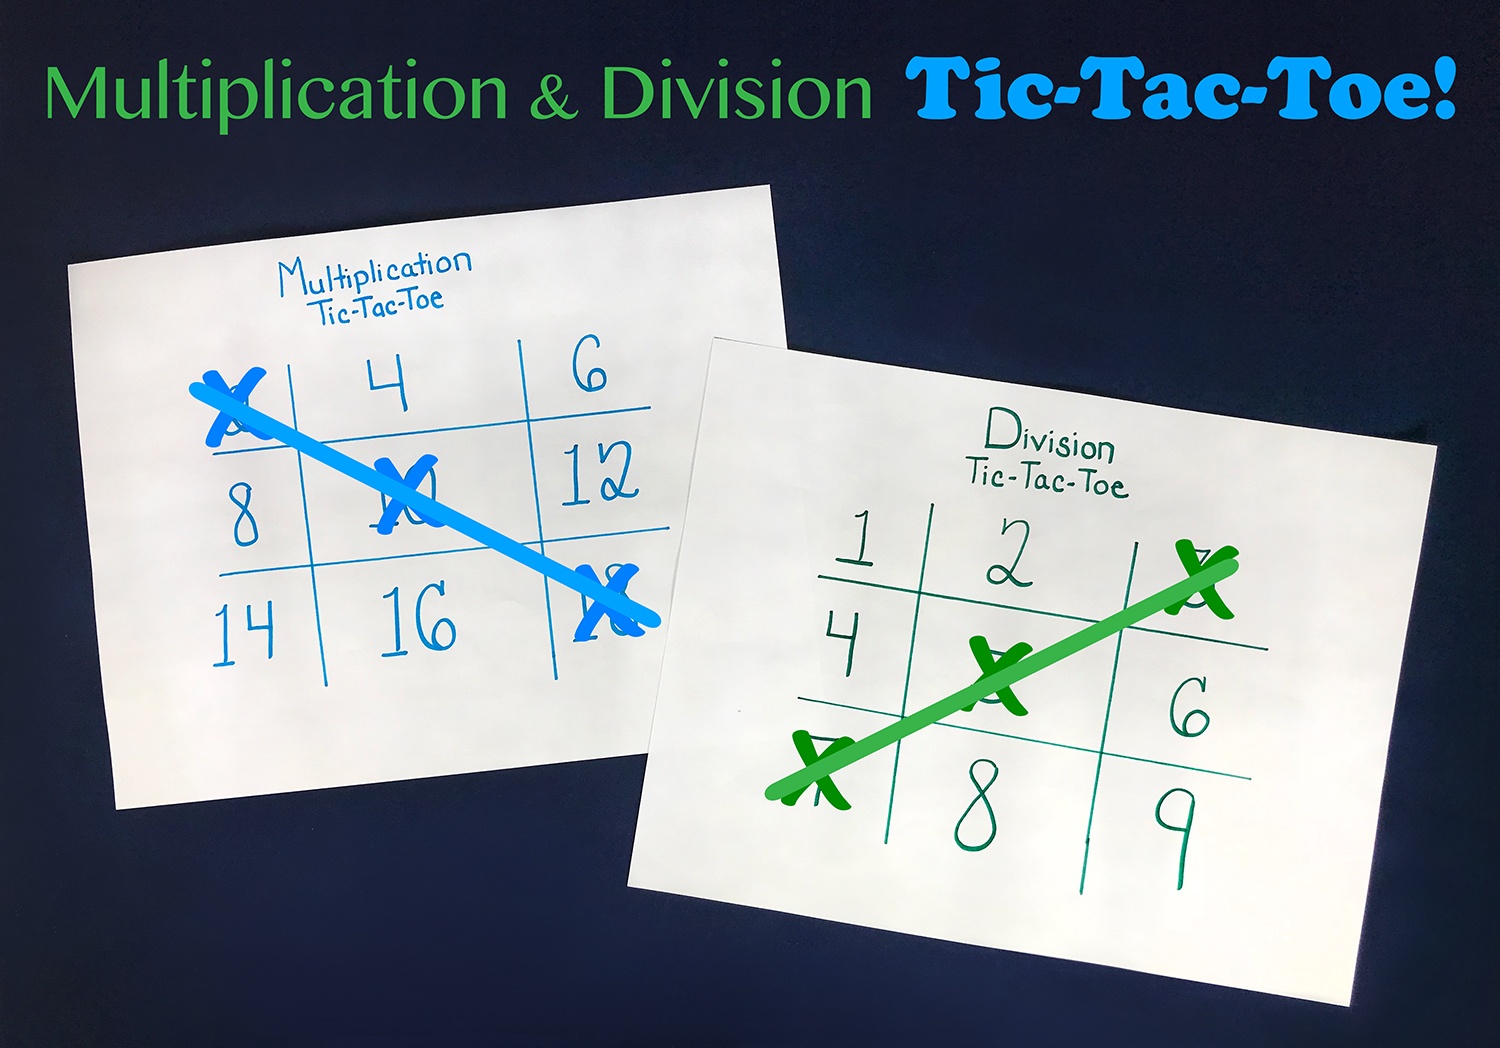 Multiplication and Division Tic-Tac-Toe